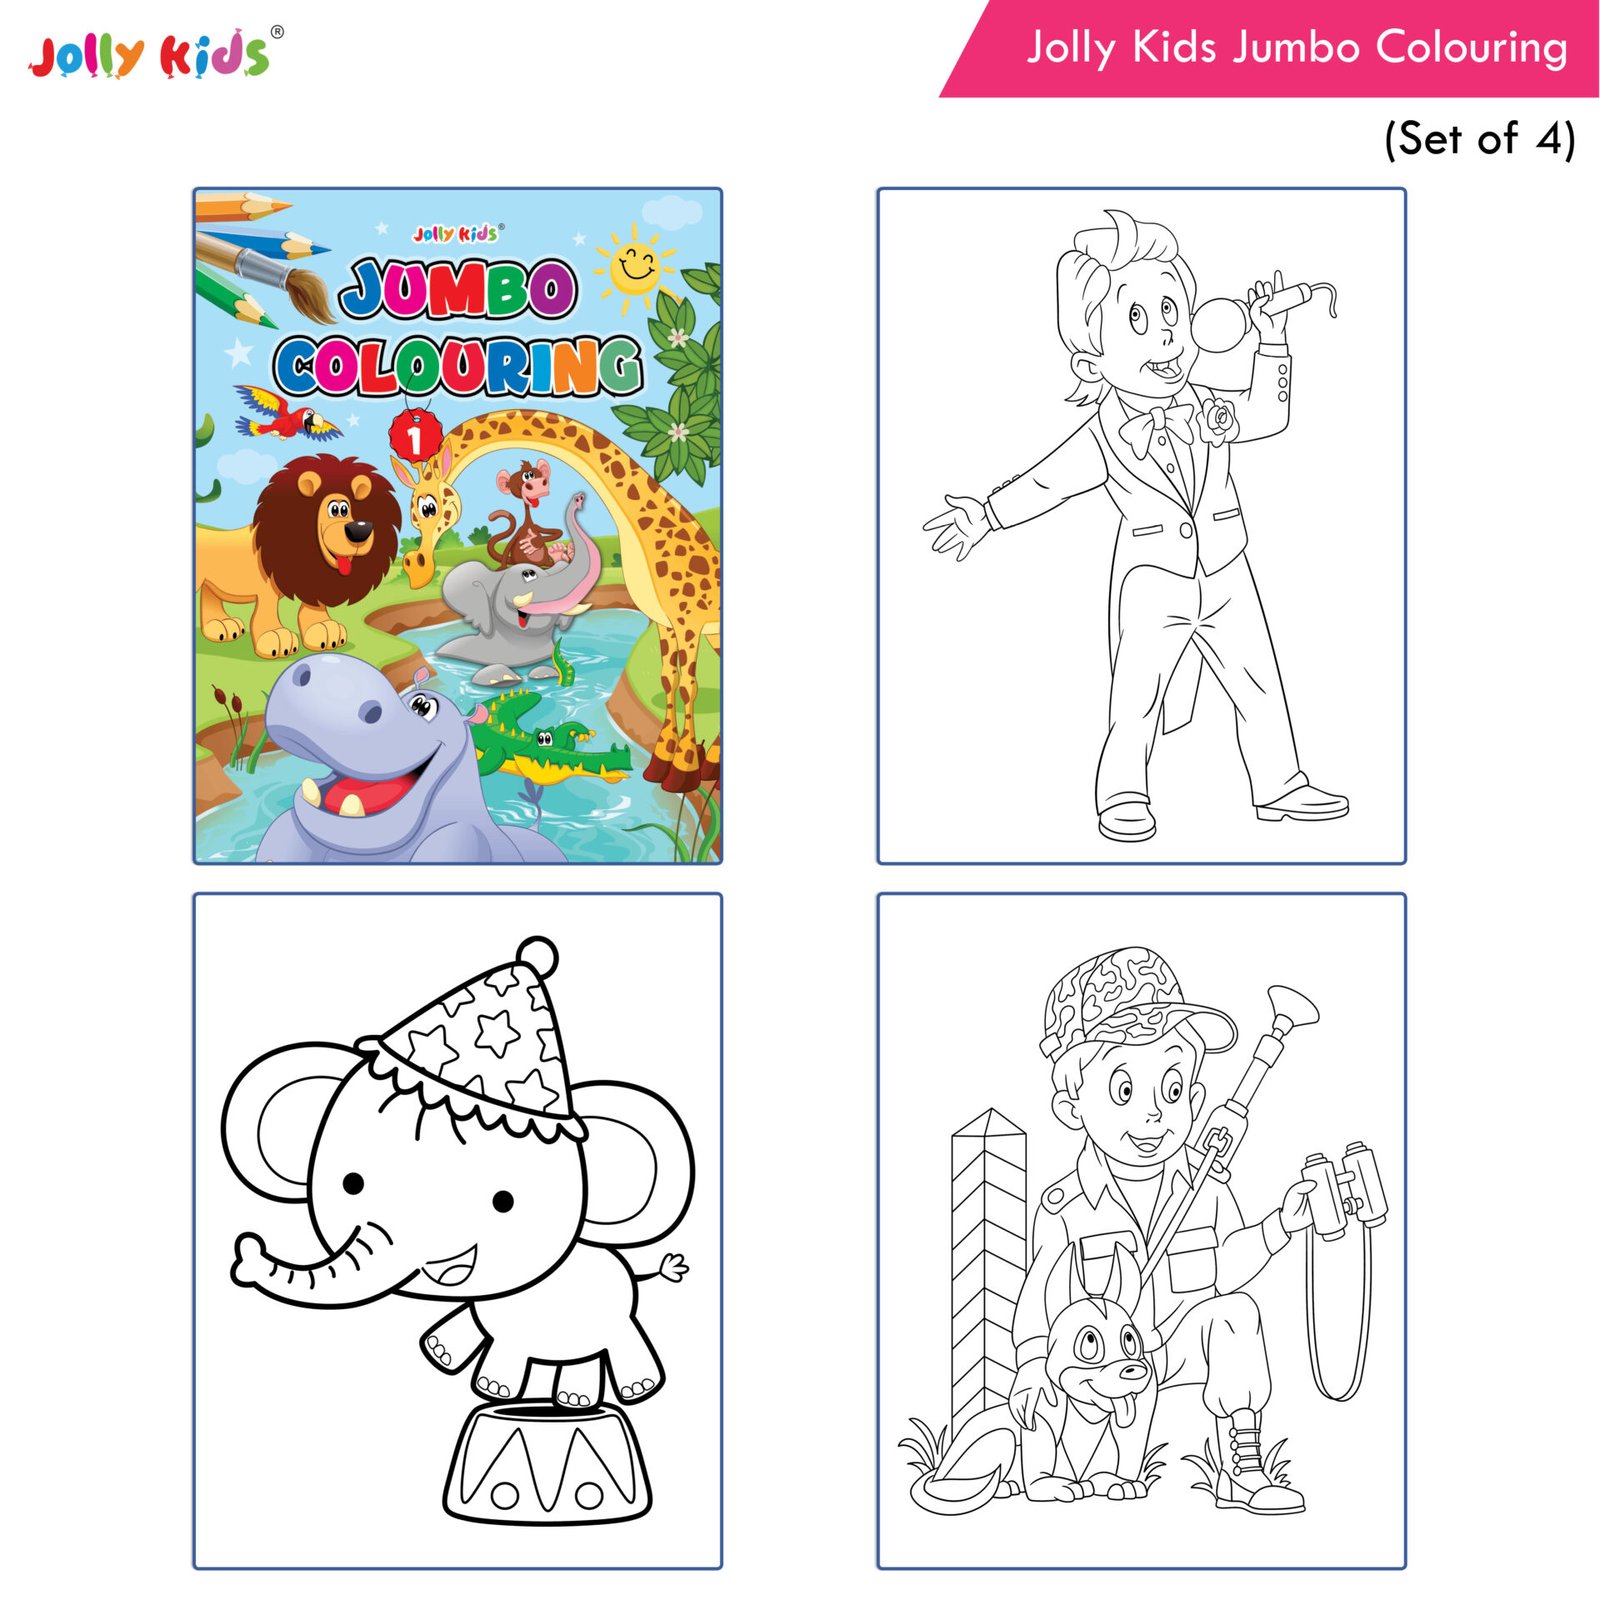 Bobbie Goods Coloring Book: A Jumbo boobiegoods Colouring for Kids Ages  4-7,8-12, Girls, and Adults, With +40 High Quality